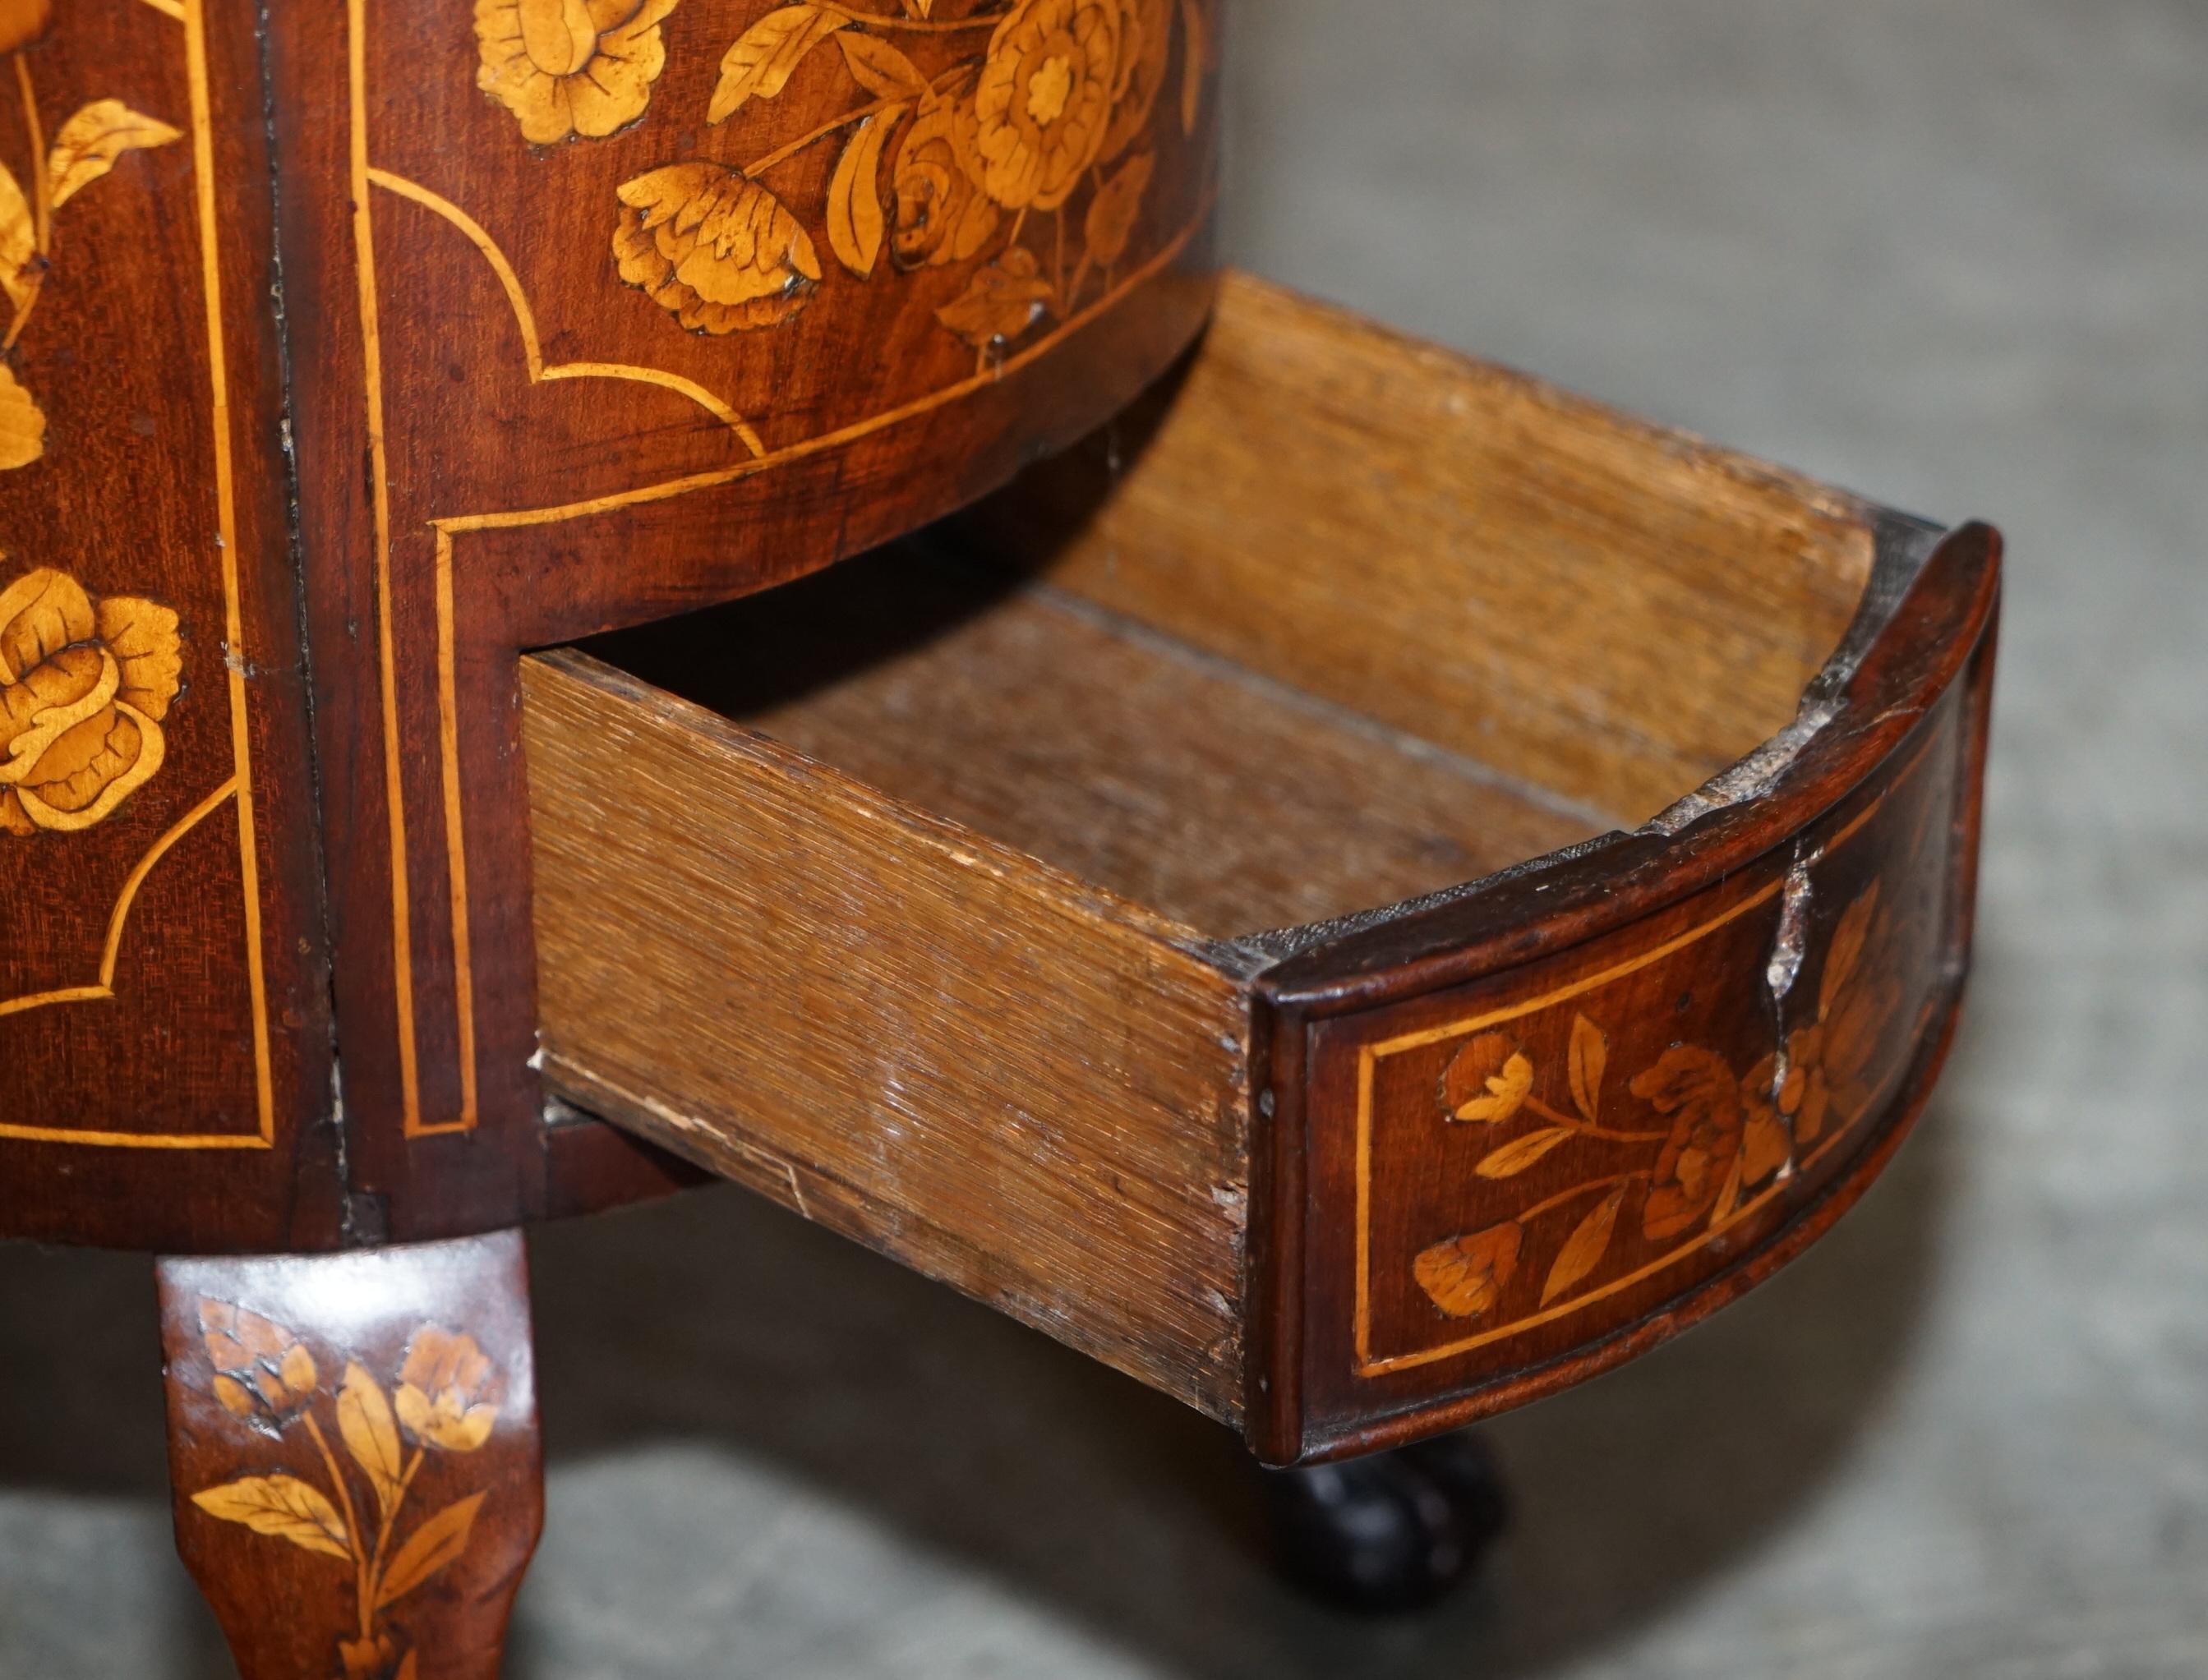 Exquisite Antique circa 1800 Dutch Inlaid Wine Cooler Bucket Claw & Ball Feet For Sale 12